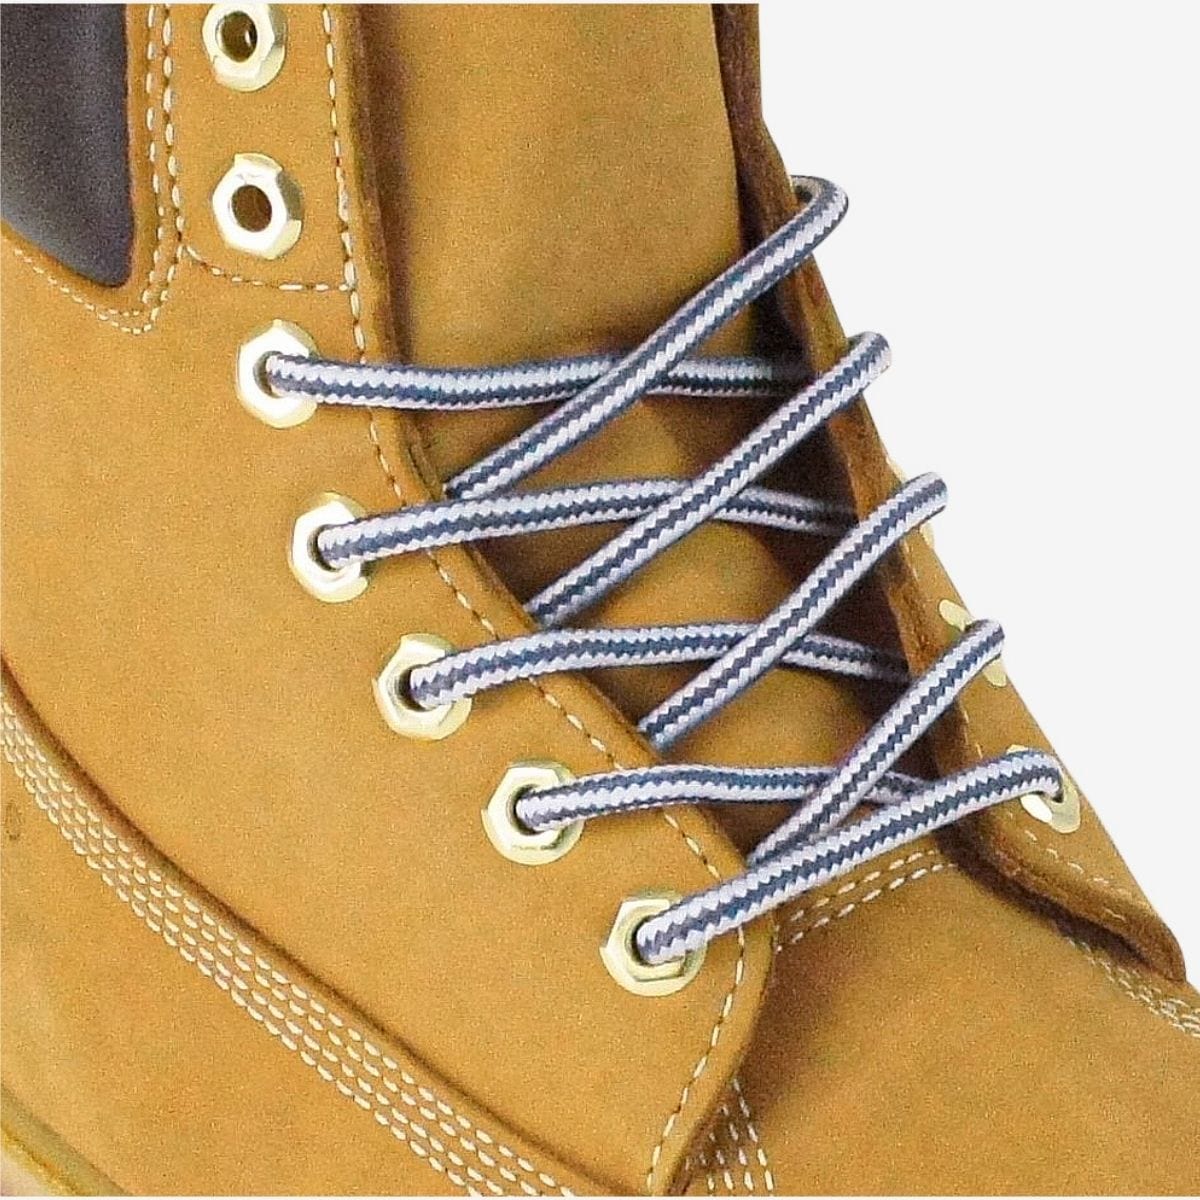 shop-round-shoelaces-online-in-dark-grey-and-white-for-boots-sneakers-and-running-shoes